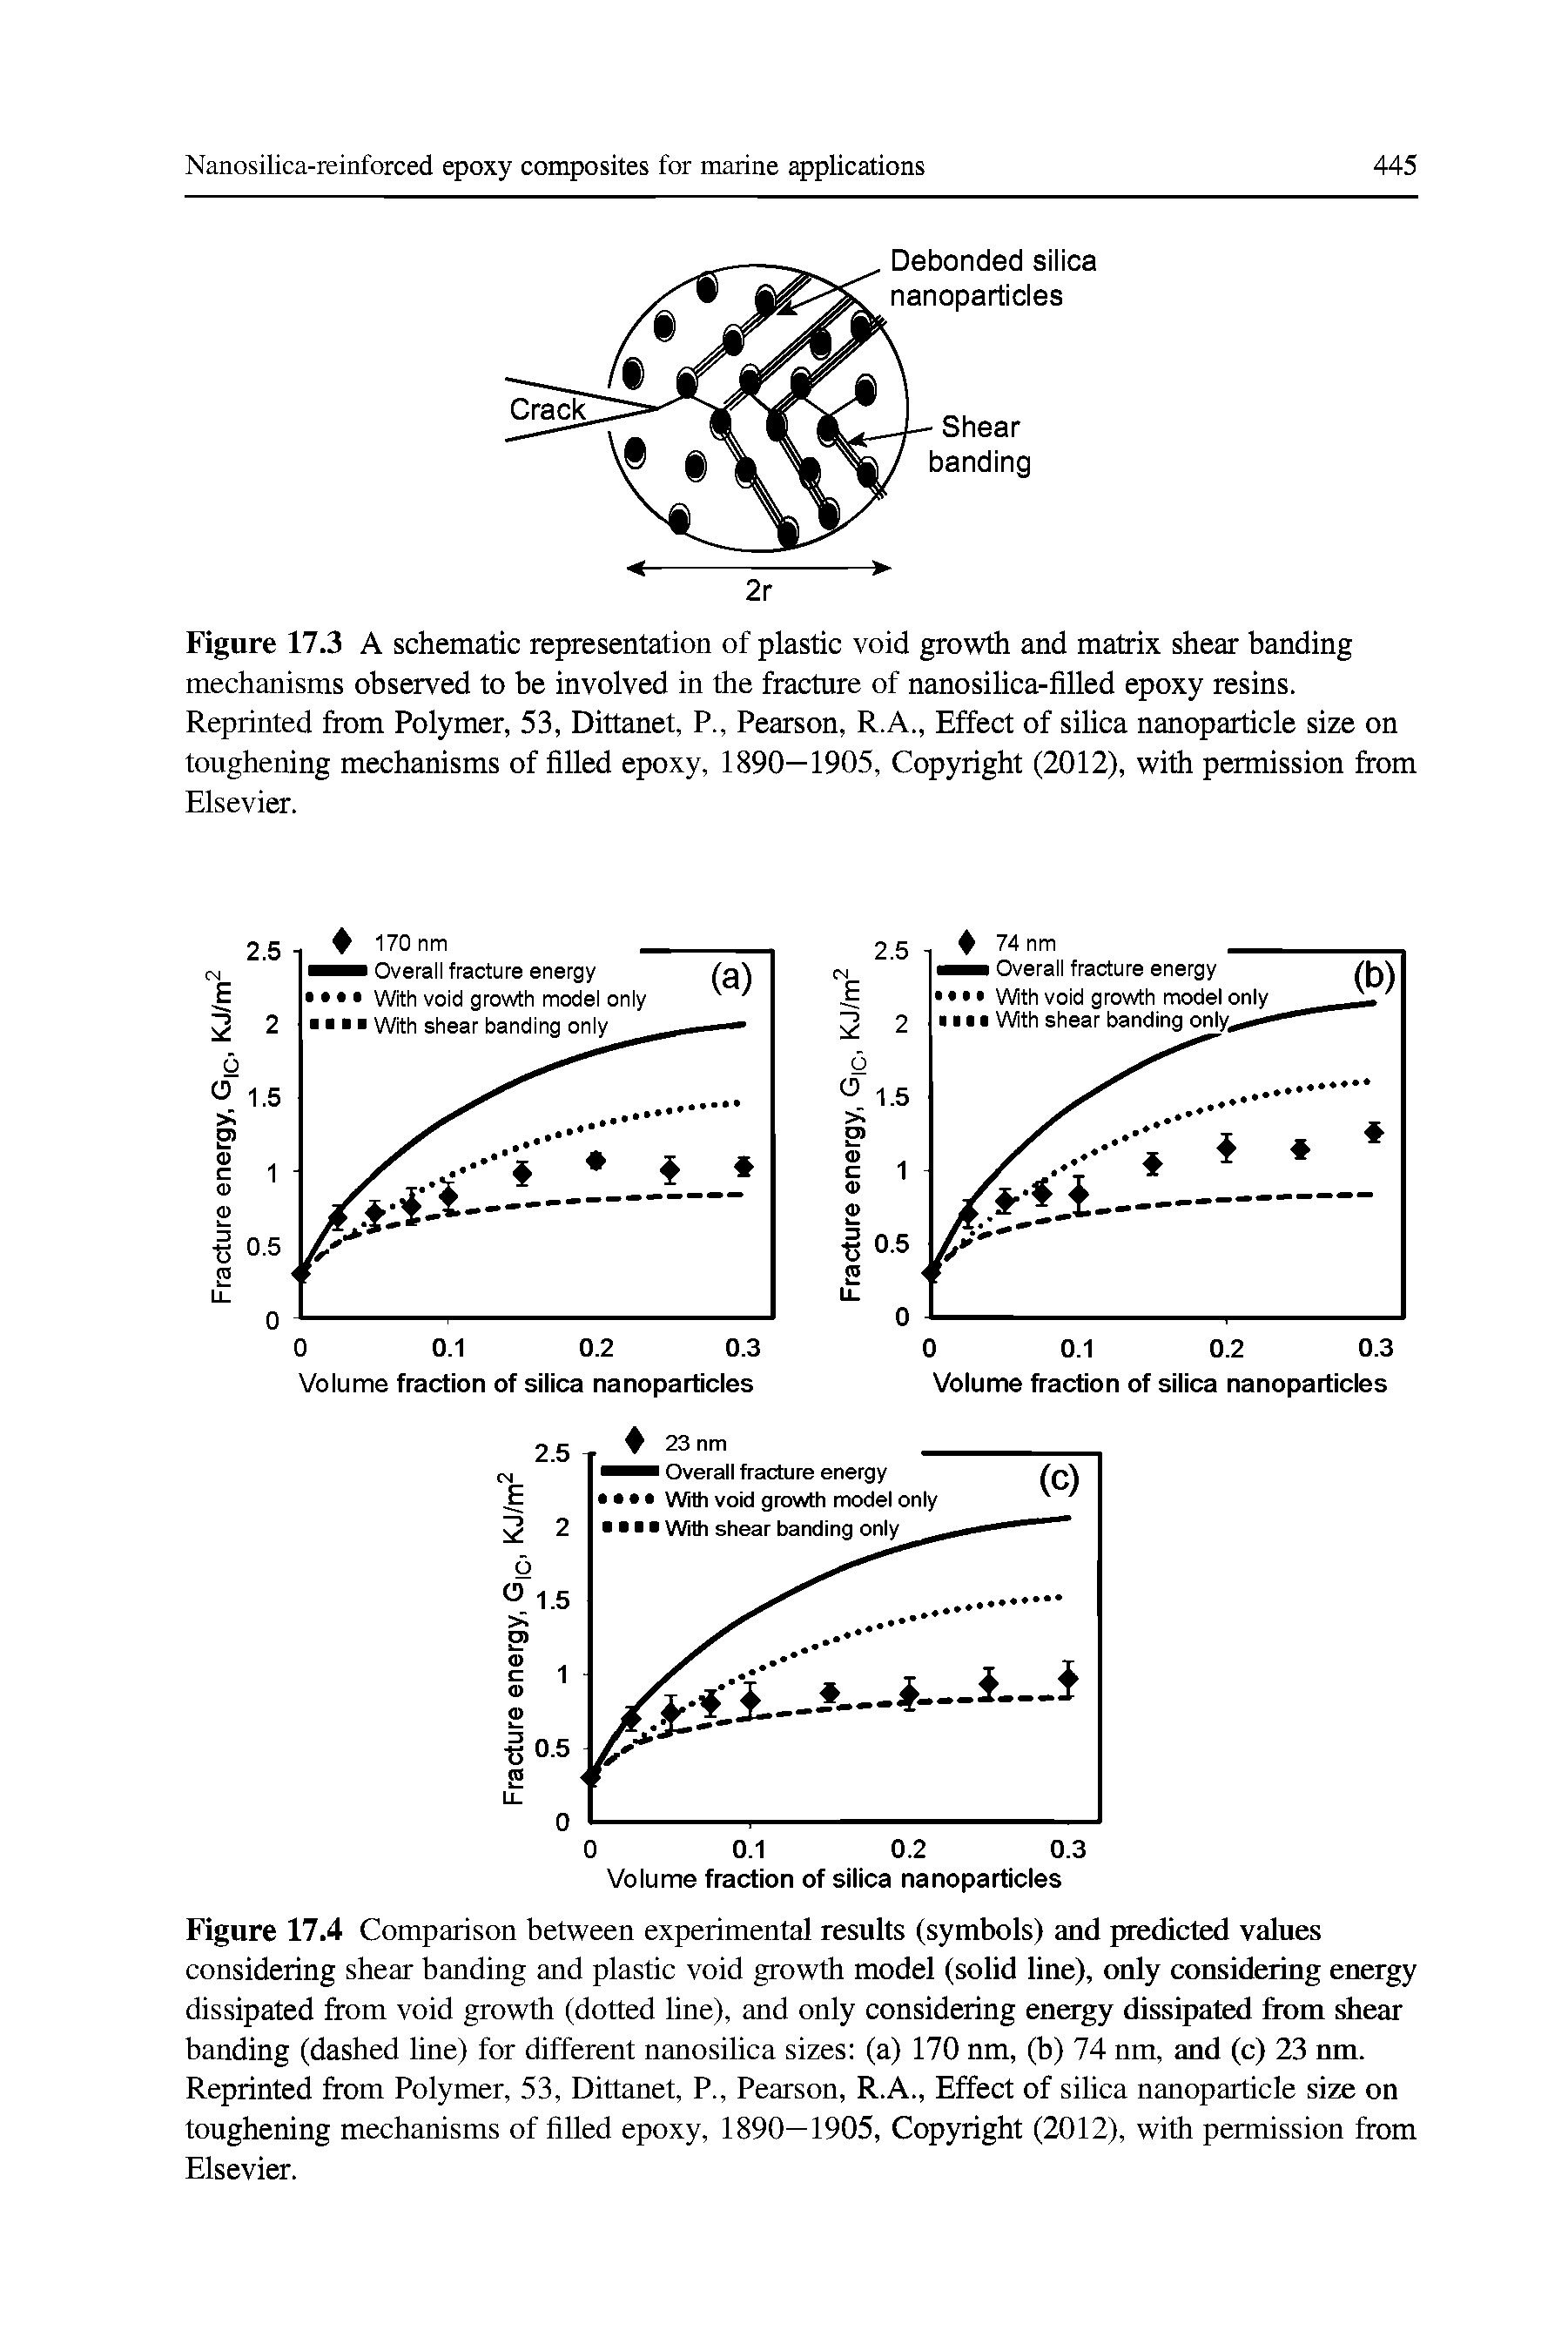 Figure 17.3 A schematic representation of plastic void growth and matrix shear banding mechanisms observed to be involved in the fracture of nanosihca-fiUed epoxy resins. Reprinted from Polymer, 53, Dittanet, P., Pearson, R.A., Effect of silica nanoparticle size on toughening mechanisms of filled epoxy, 1890—1905, Copyright (2012), with permission from...